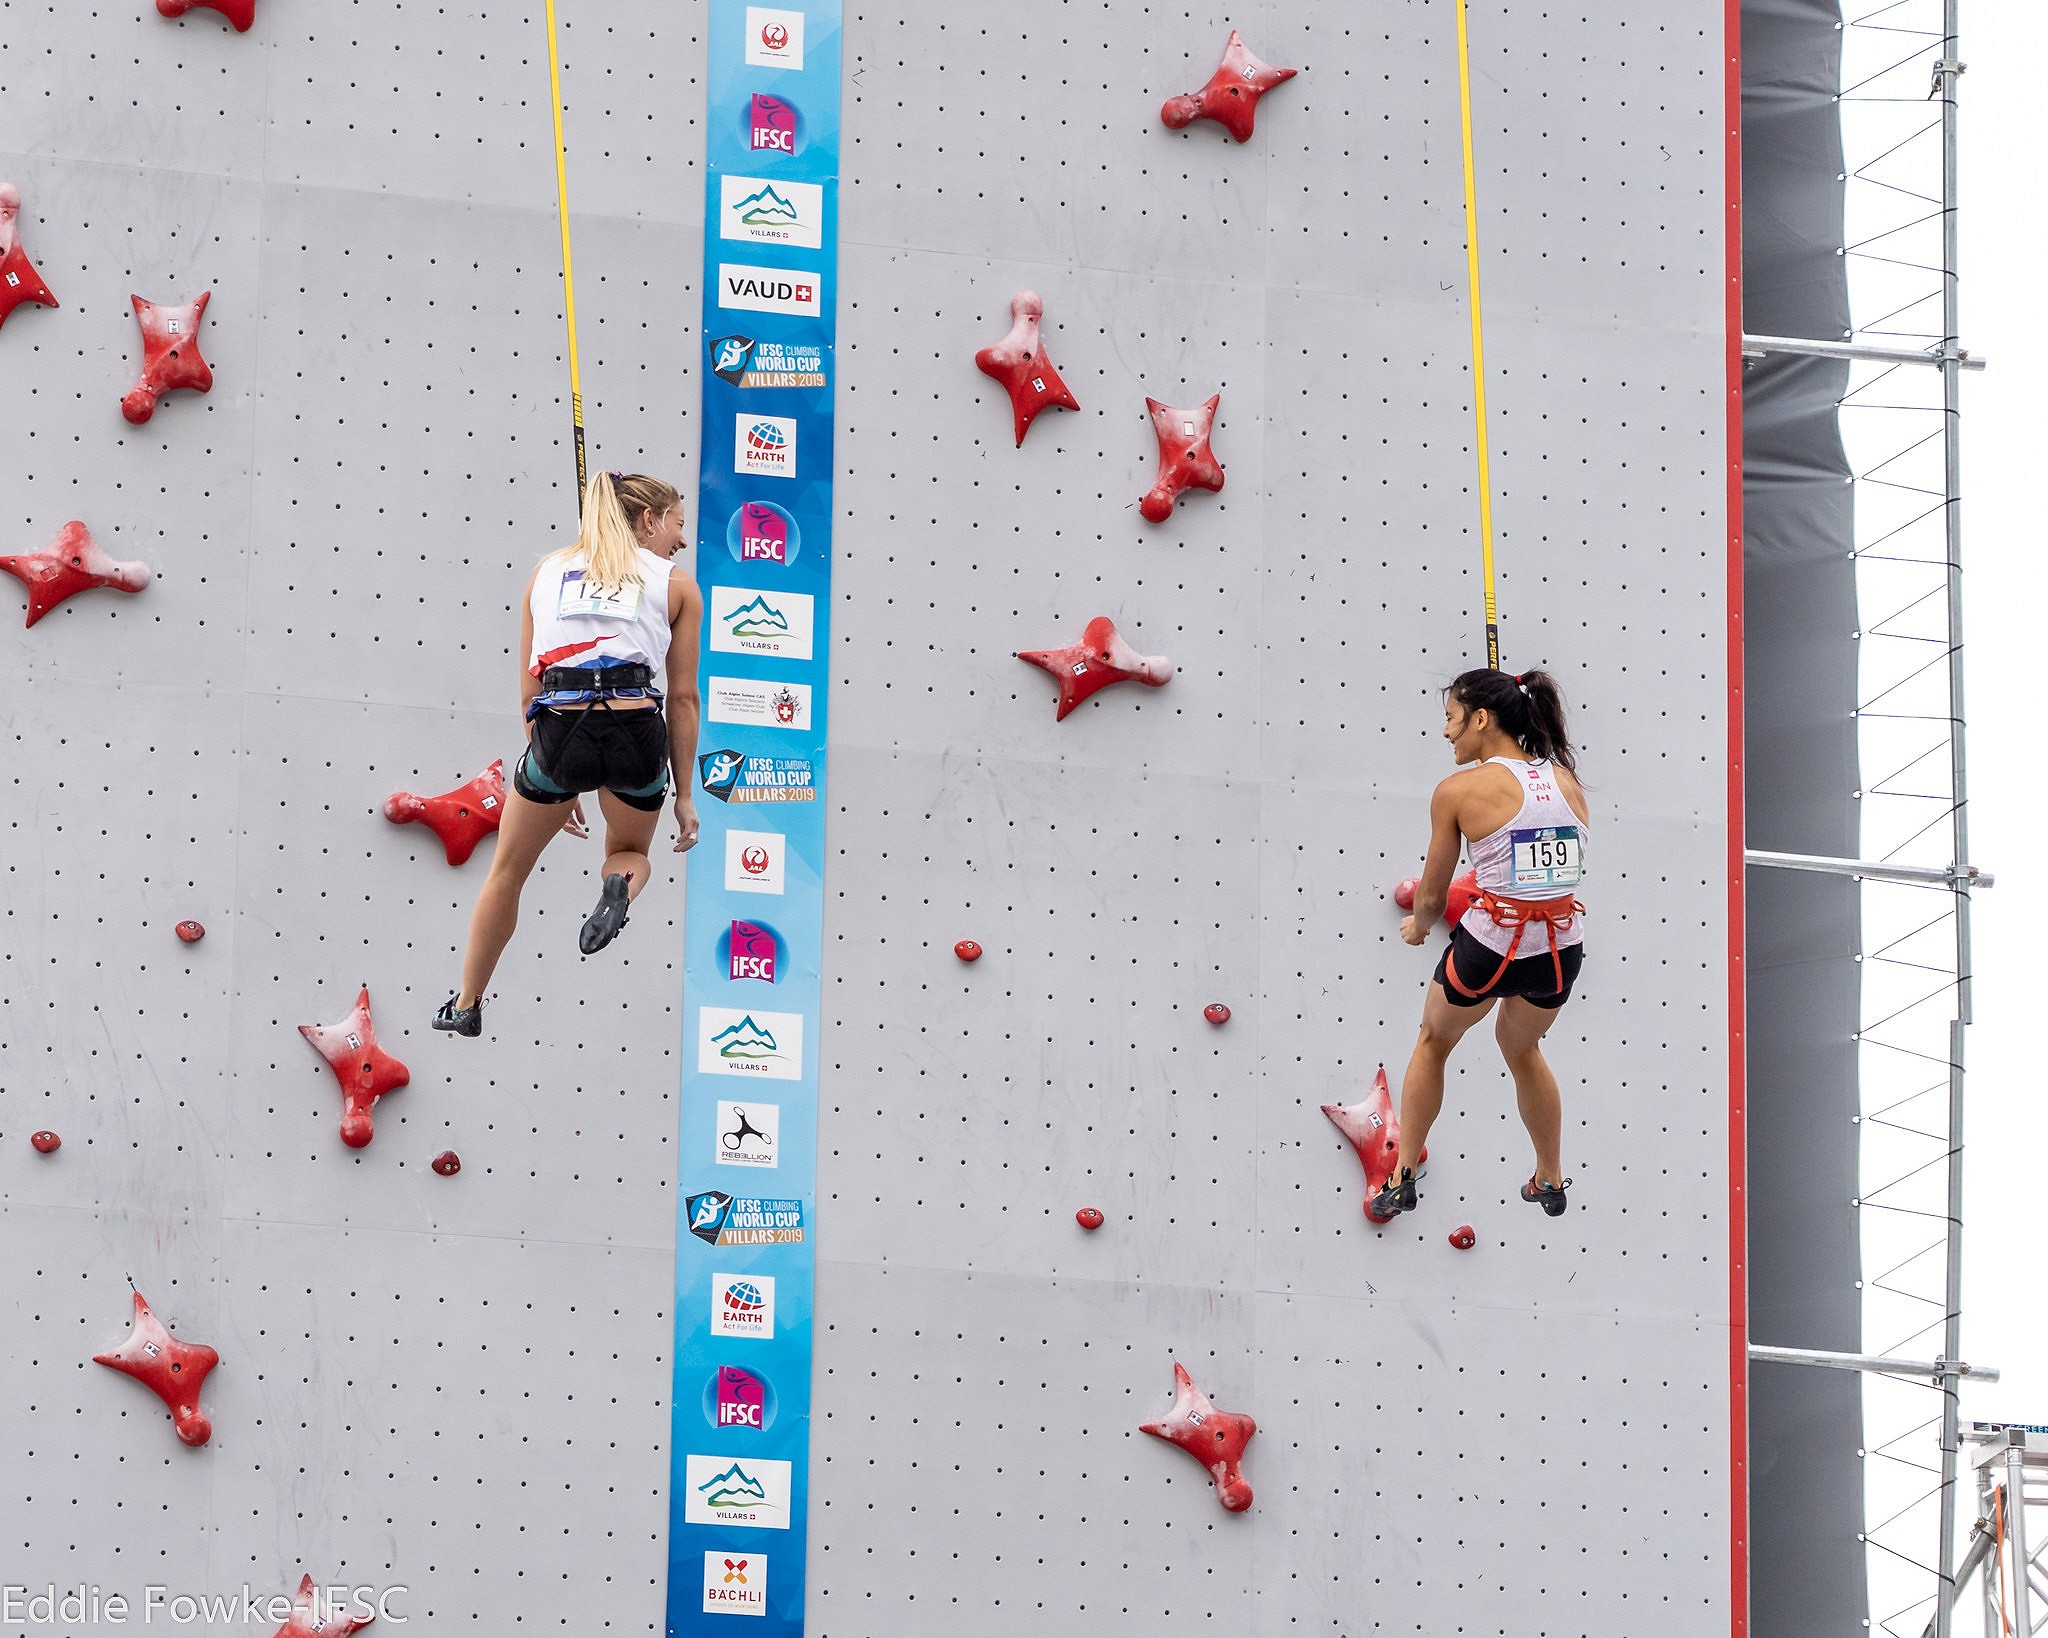 Great Britain's Shauna Coxsey has been enjoying the challenge of speed climbing as part of her journey to Olympic selection.  © Eddie Fowke/IFSC